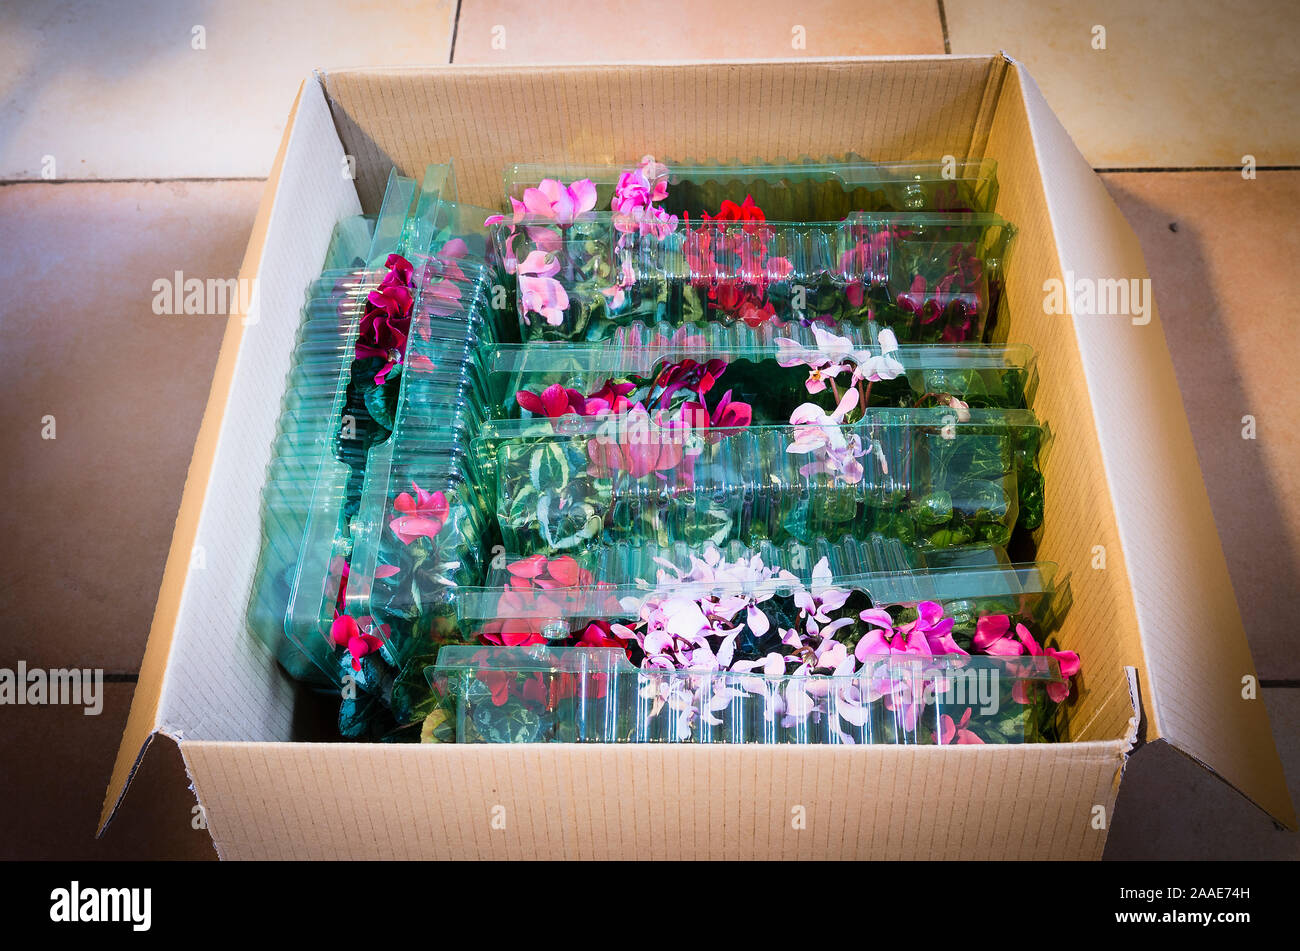 A Mail-order box opened to reveal a collection of young potted fjlowering Cyclamen persicum Metis strain bought online showing effectove bprotection d Stock Photo